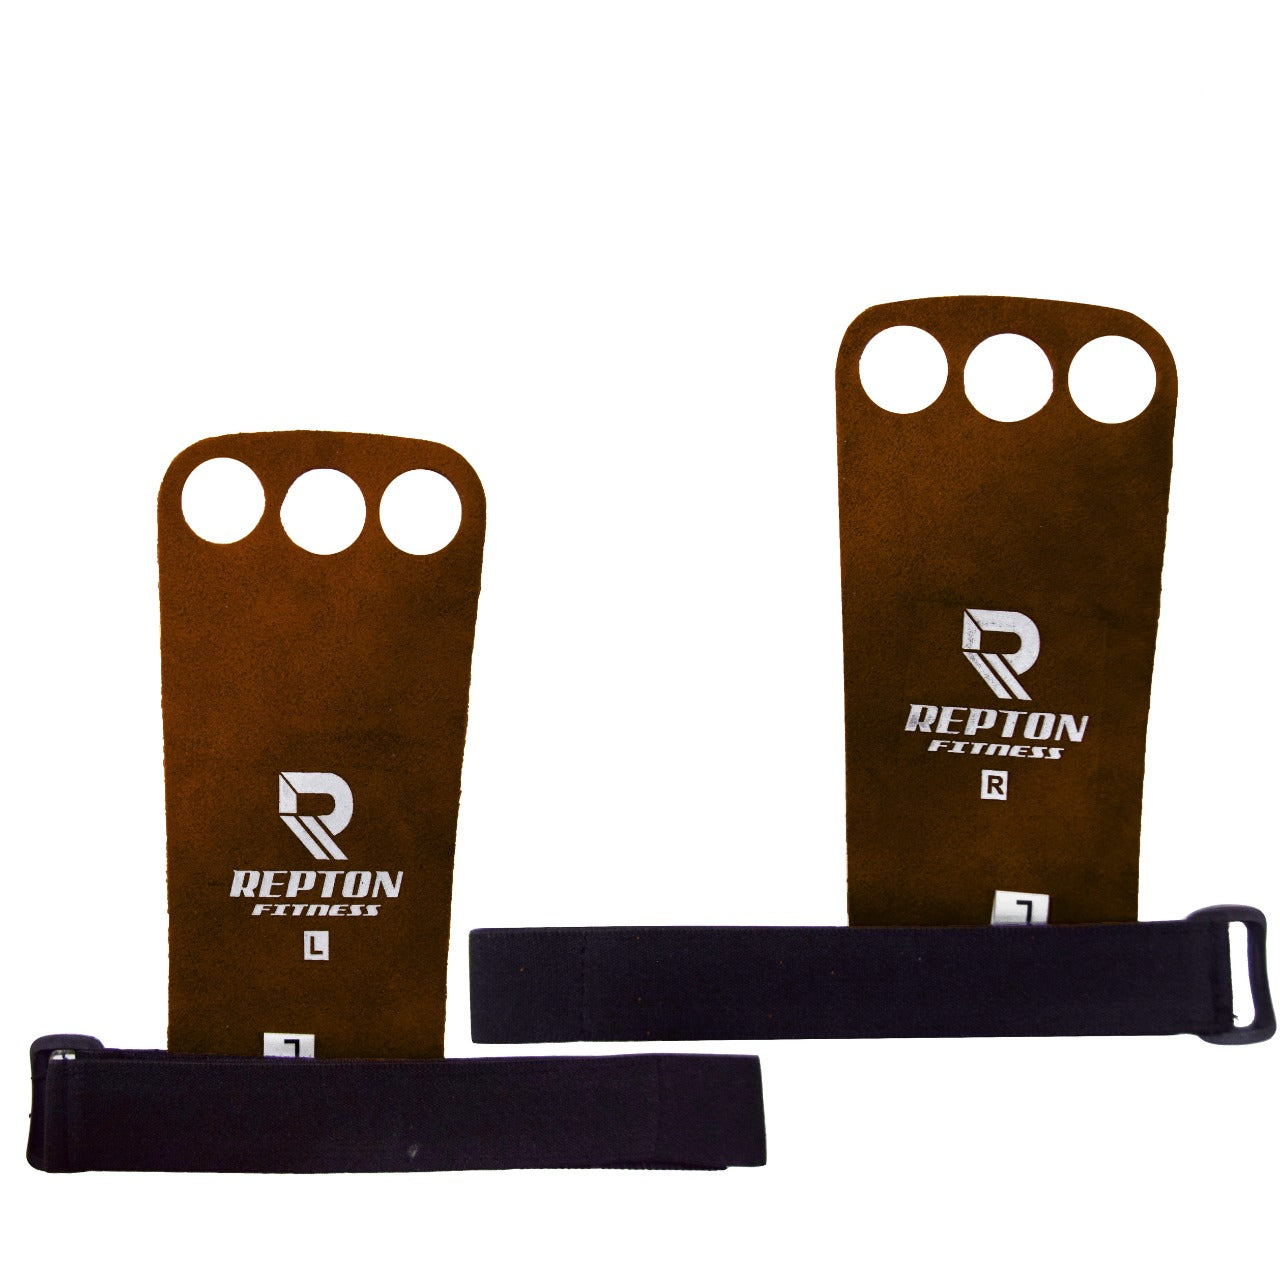 Leather Palm Grips Cross Fit Grips Unisex Repton Fitness Gear